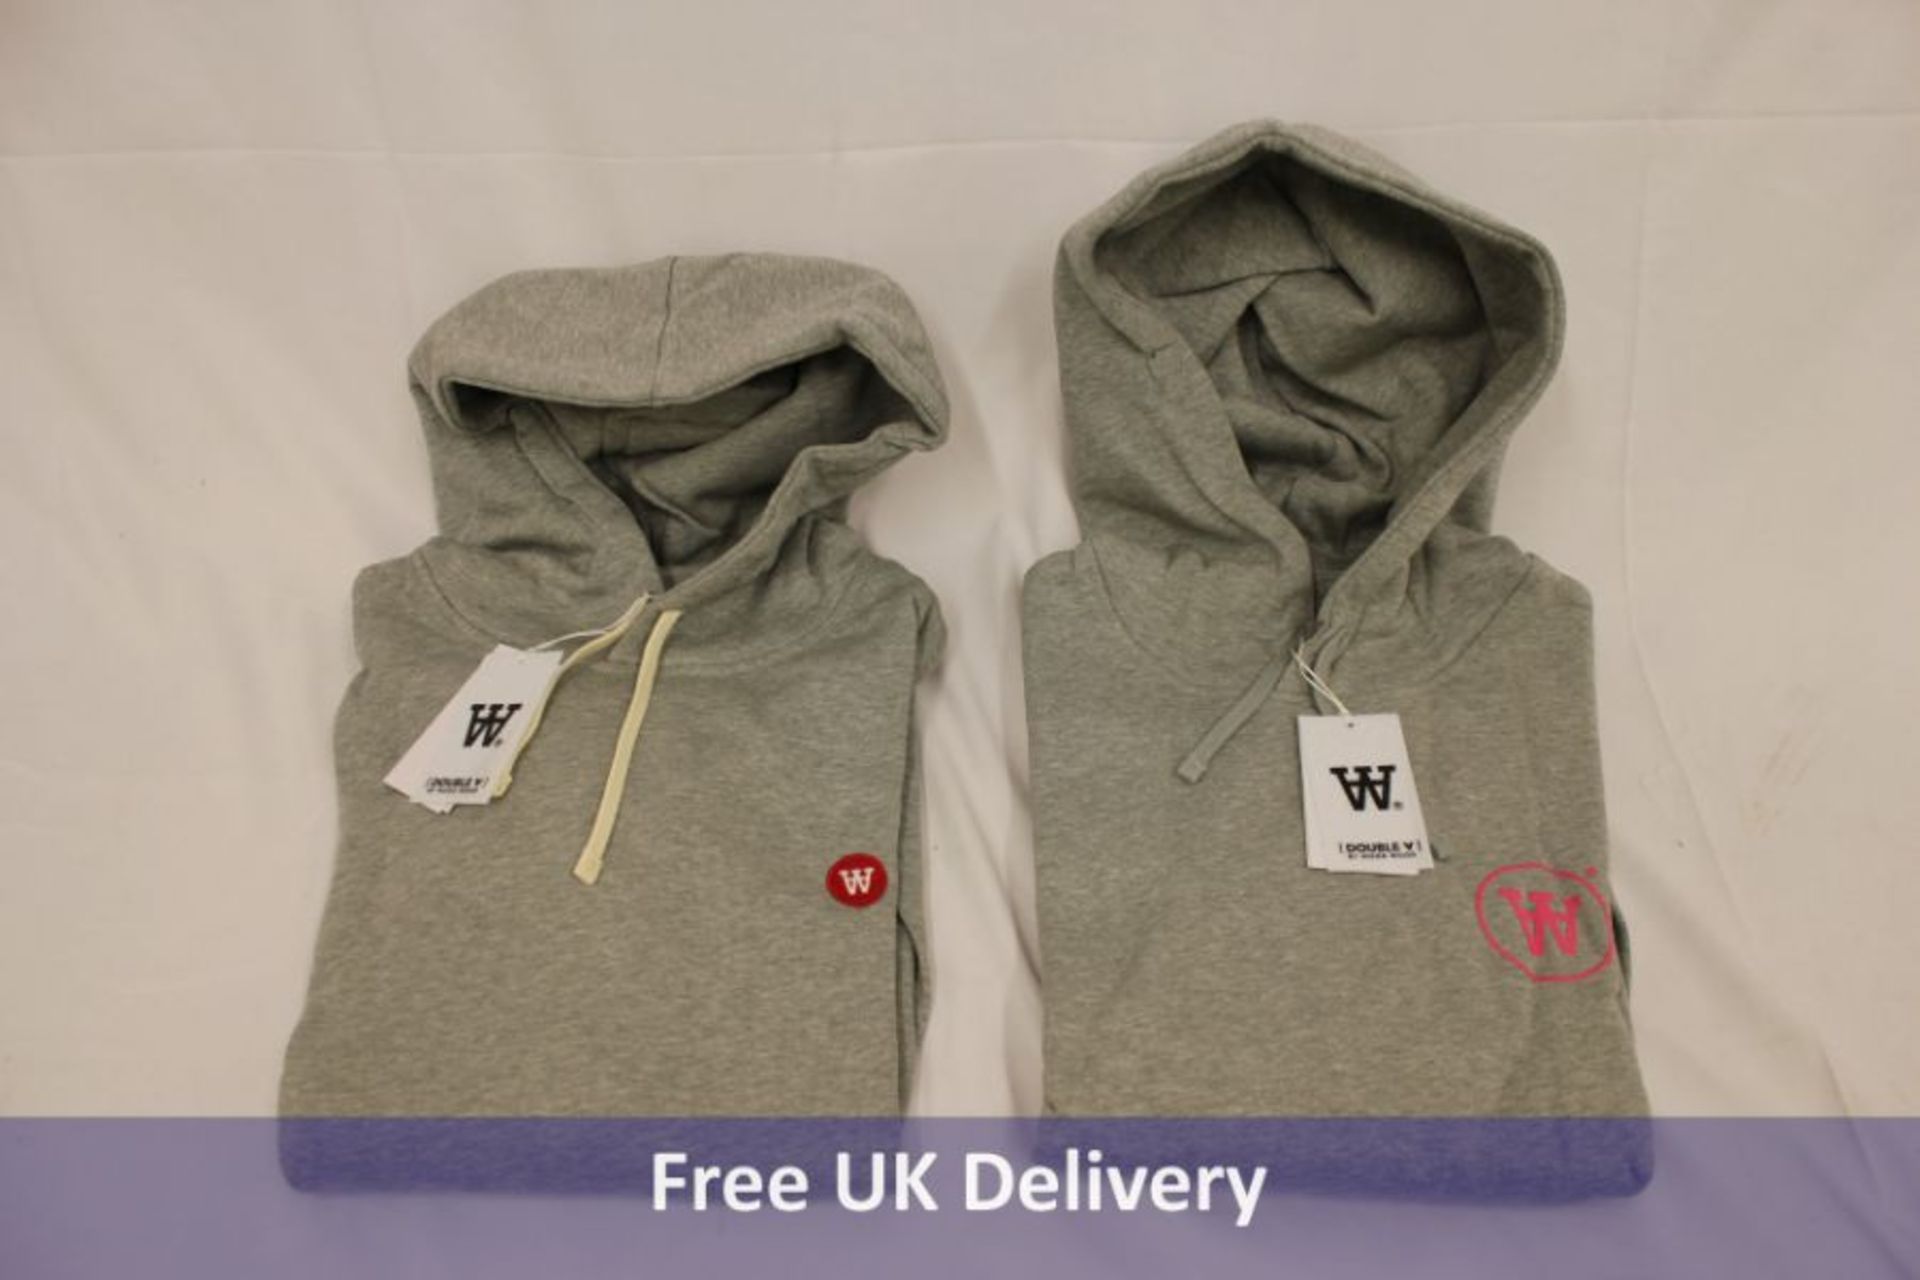 Eleven Double A Ian Hoodie, Grey to include 3x Medium, 4x Large, 3x XL and 1x XXL